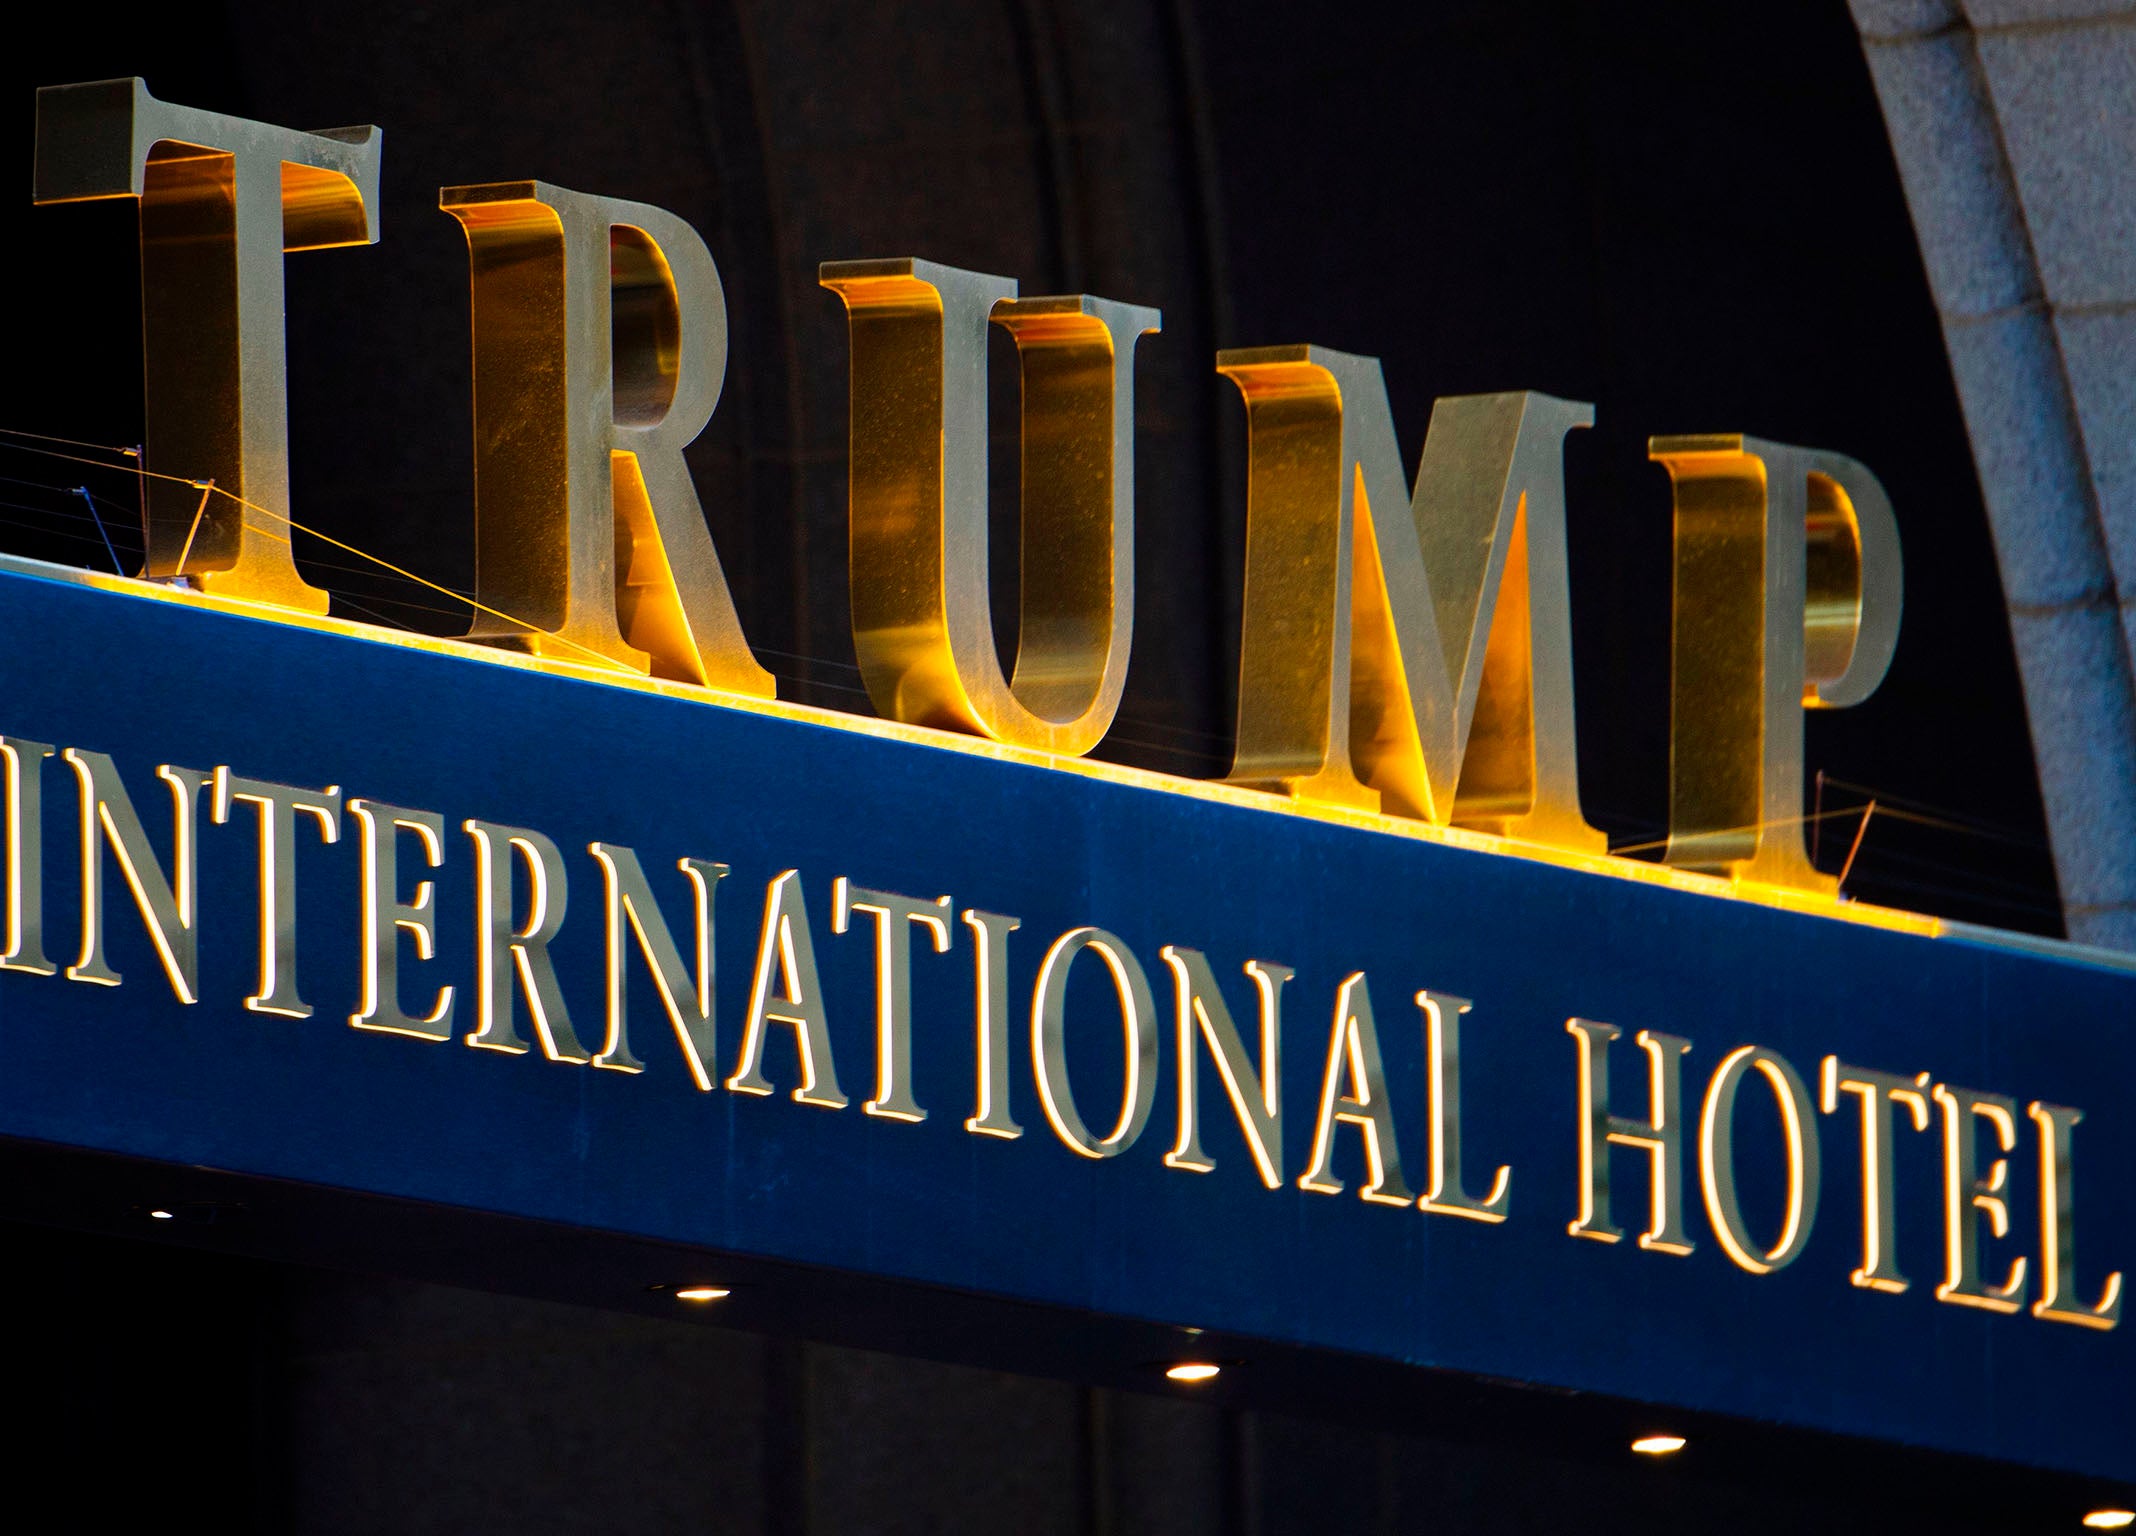 Critics have long argued the Washington-based Trump International Hotel should be considered a conflict of interest for the US President